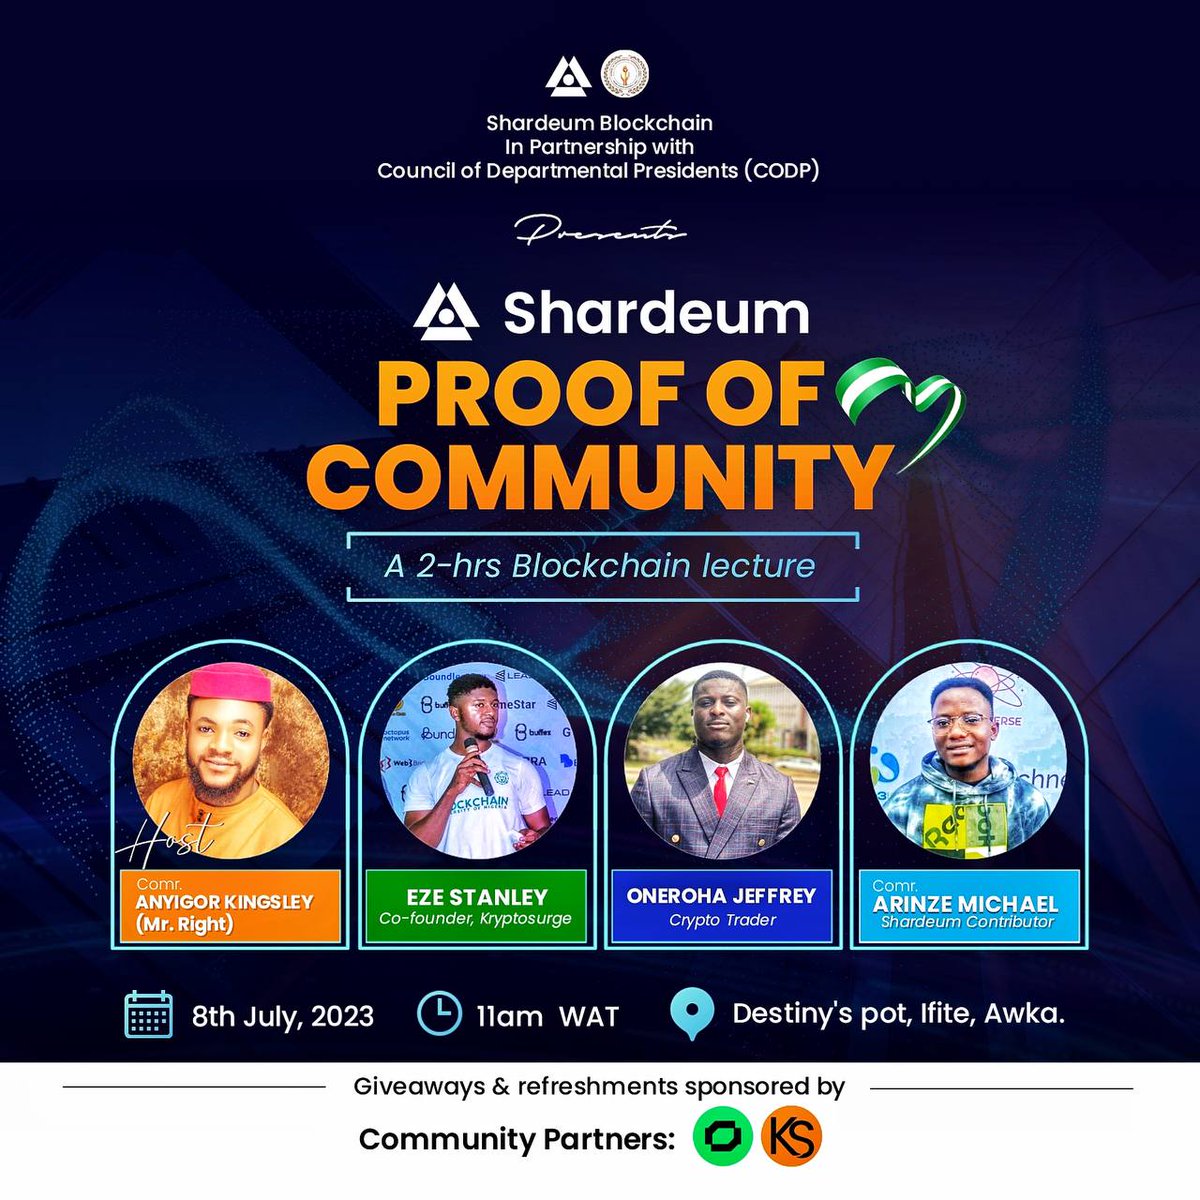 Shardeum will host it's first #ProofOfCommunity in Anambra State in collaboration with the Council of Departmental Presidents (CODP) University of Nnamdi Azikiwe Awka. 🇳🇬

Venue: Destiny Pot, Ifite Awka
Date: 8th June 2023
Time: 10:00am UTC

Register: lnkd.in/duMYWYBB